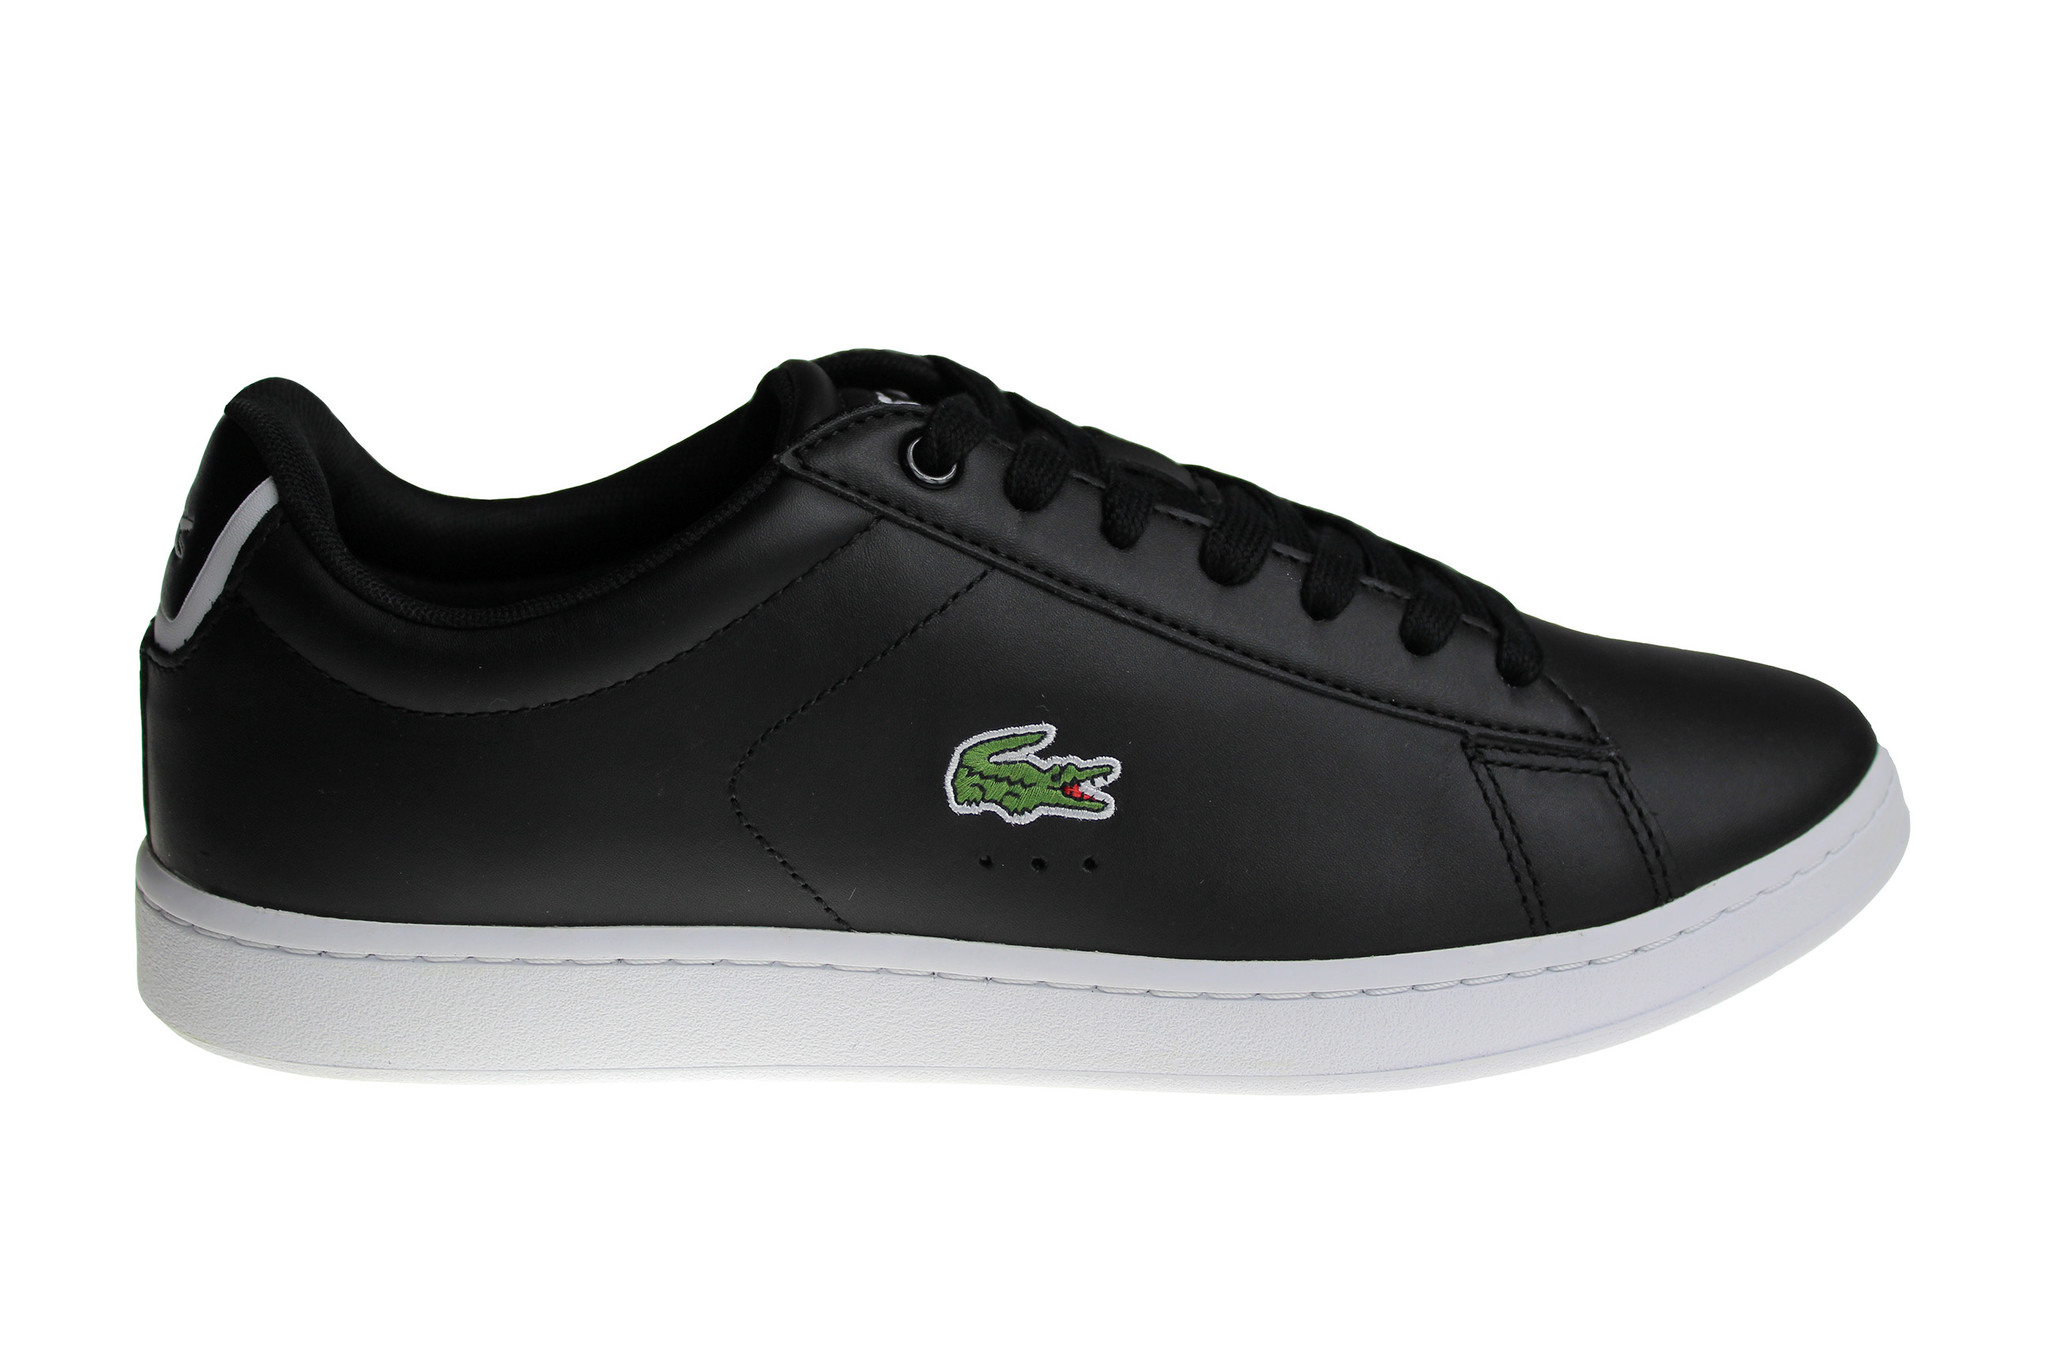 lacoste shoes black high top